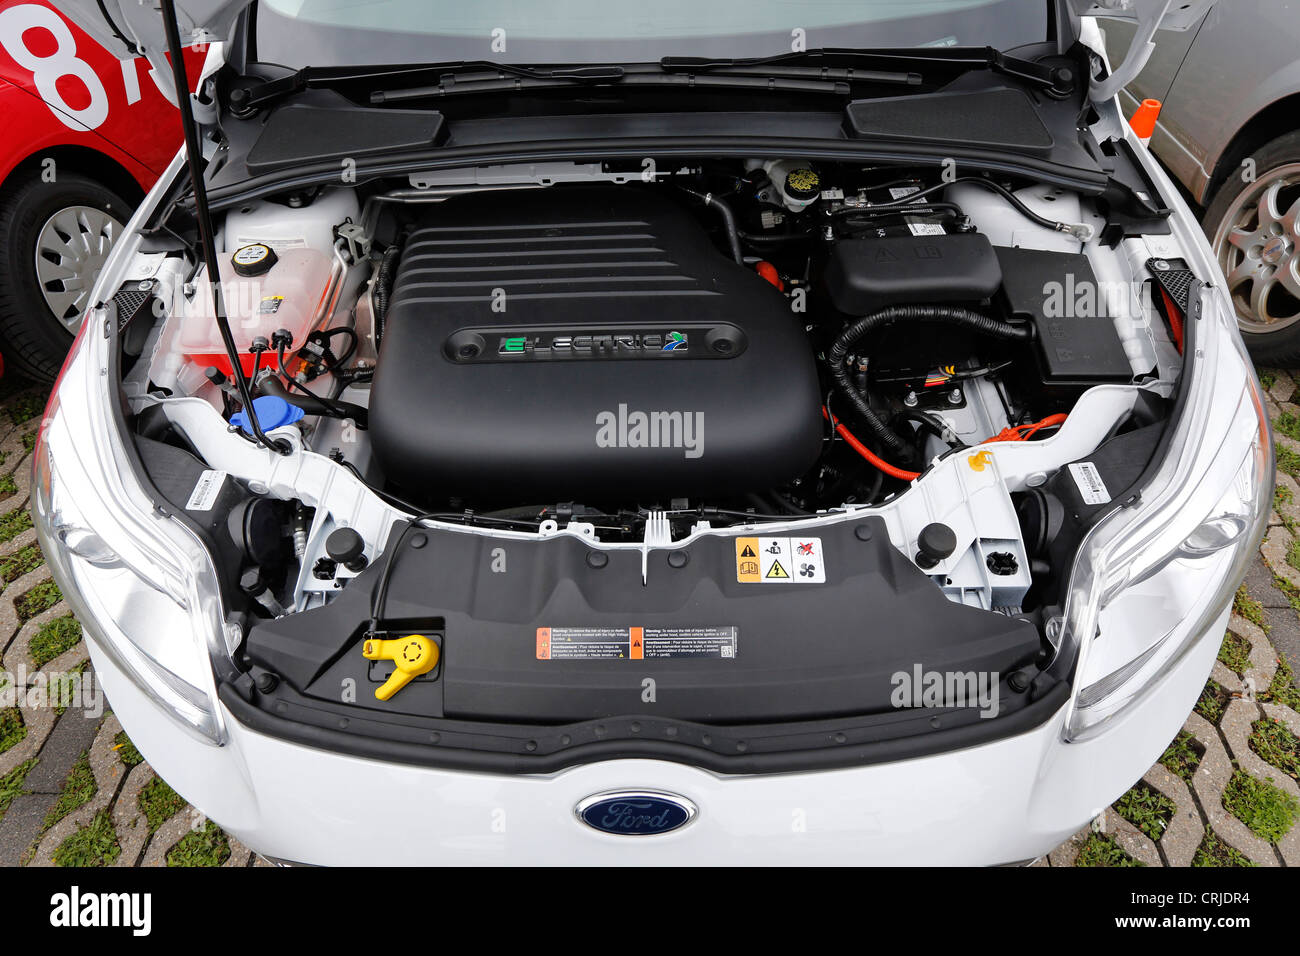 Electric engine of the Ford Focus ELECTRIC car Stock Photo